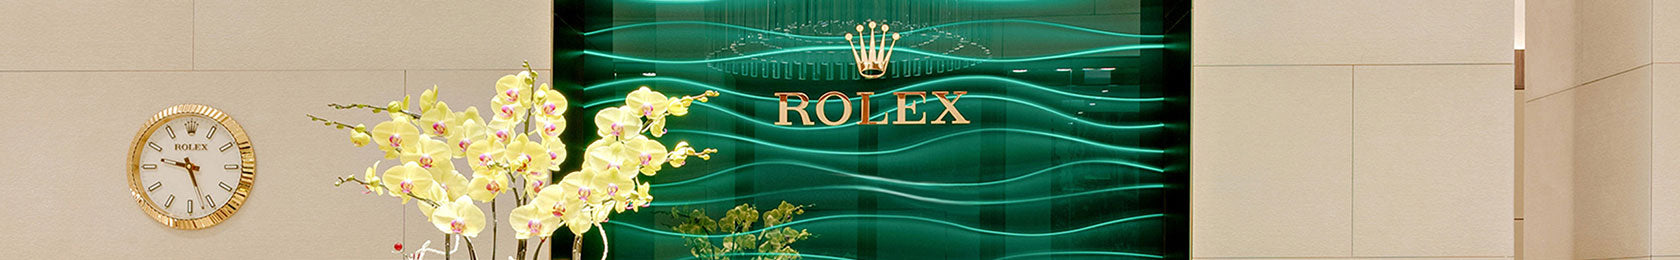 Rolex Sales Counter at Fink's Jewelers in Raleigh, NC